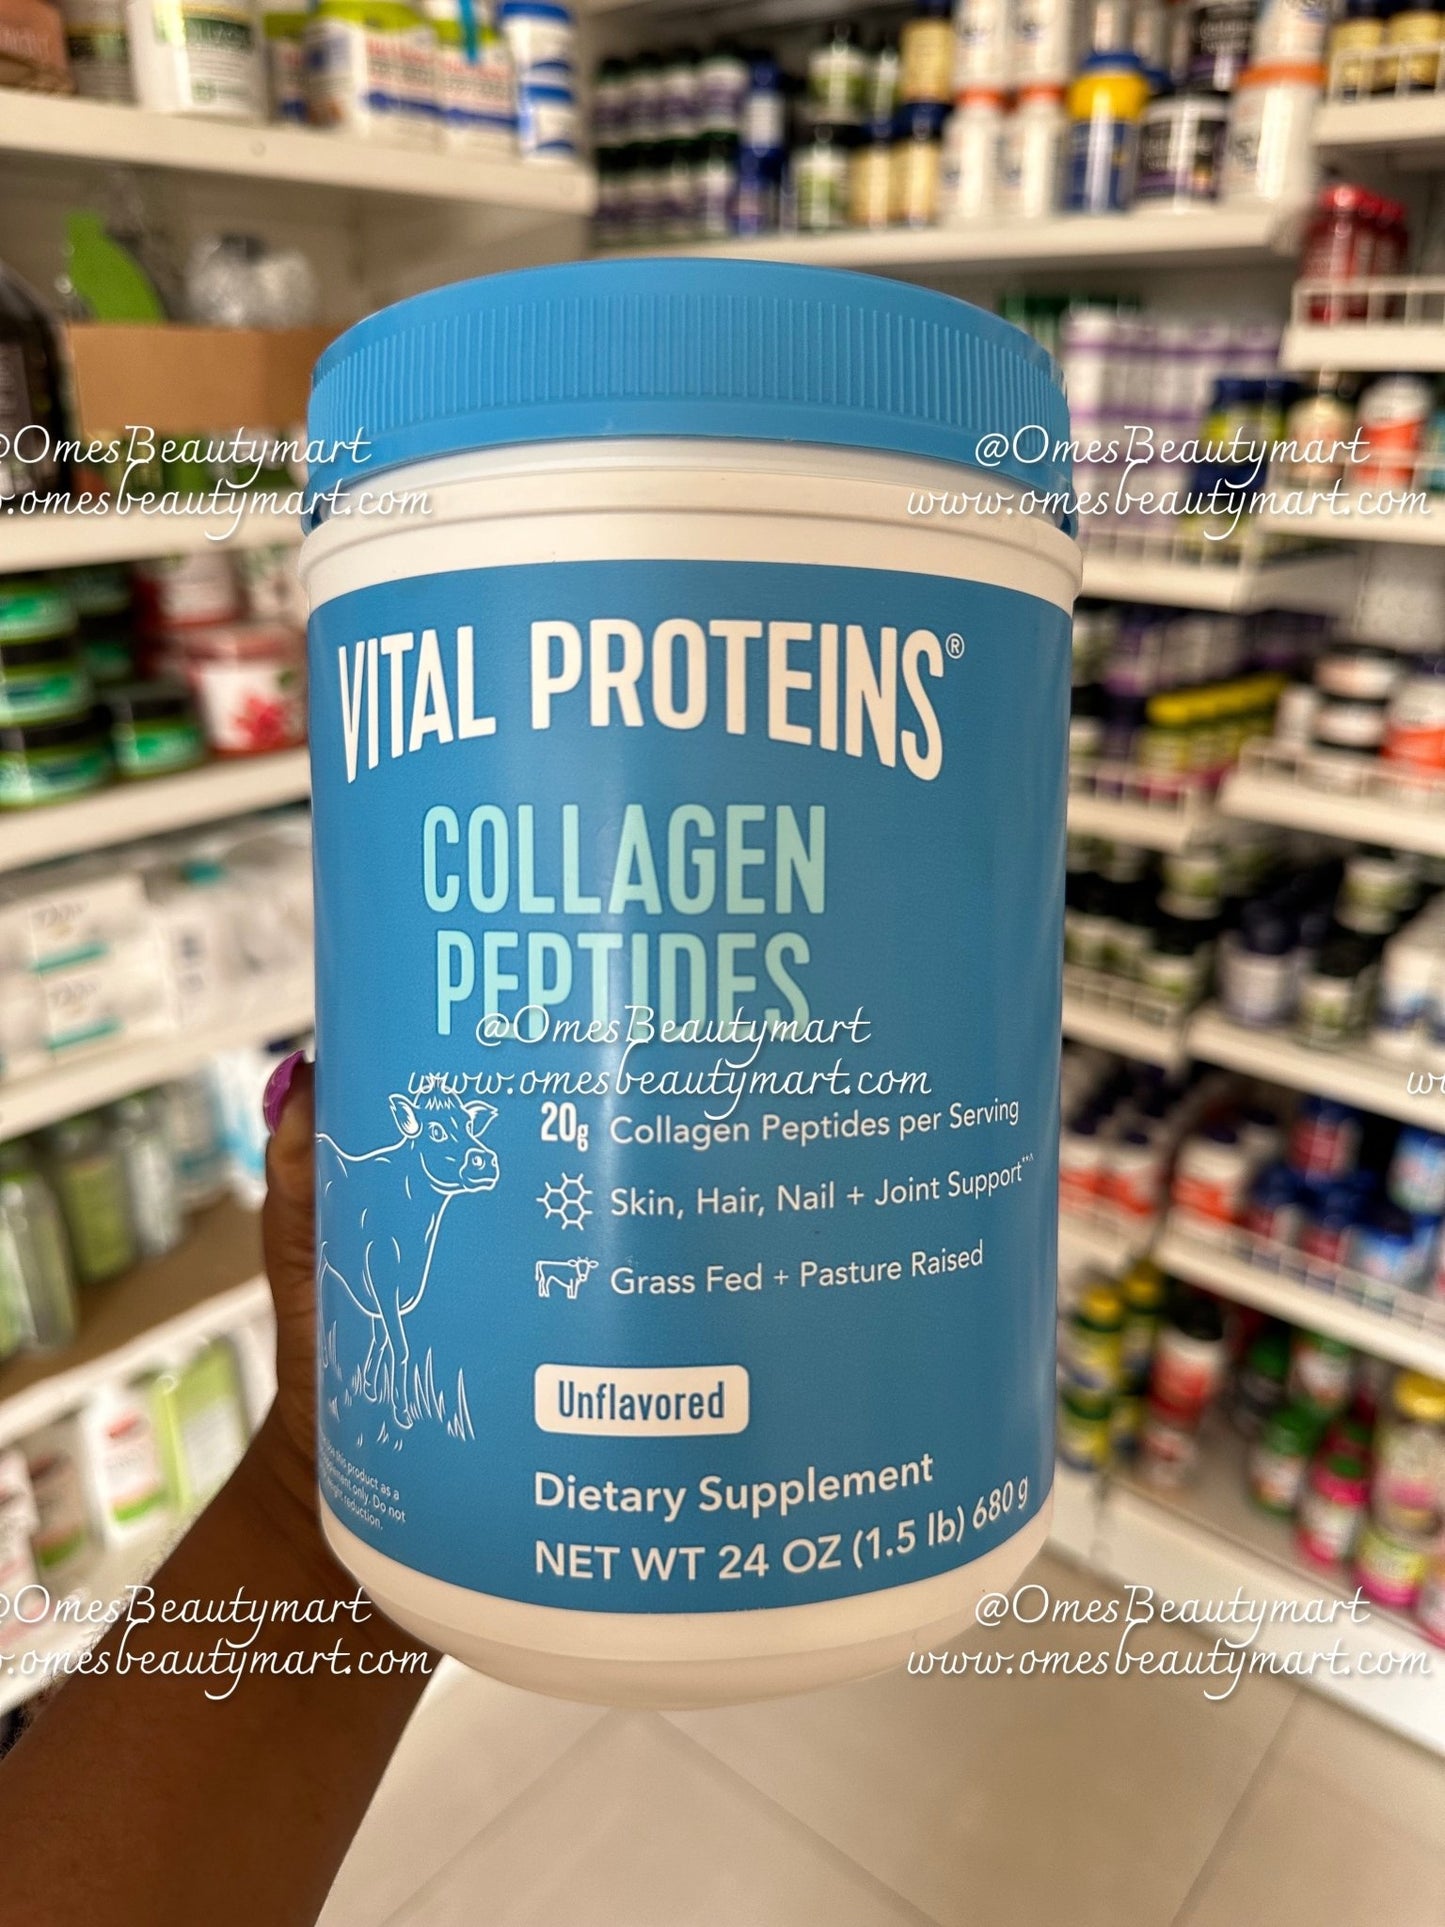 Vital Proteins Collagen Peptides, Unflavored | 20g of Collagen | 24 oz - 680g - Ome's Beauty Mart